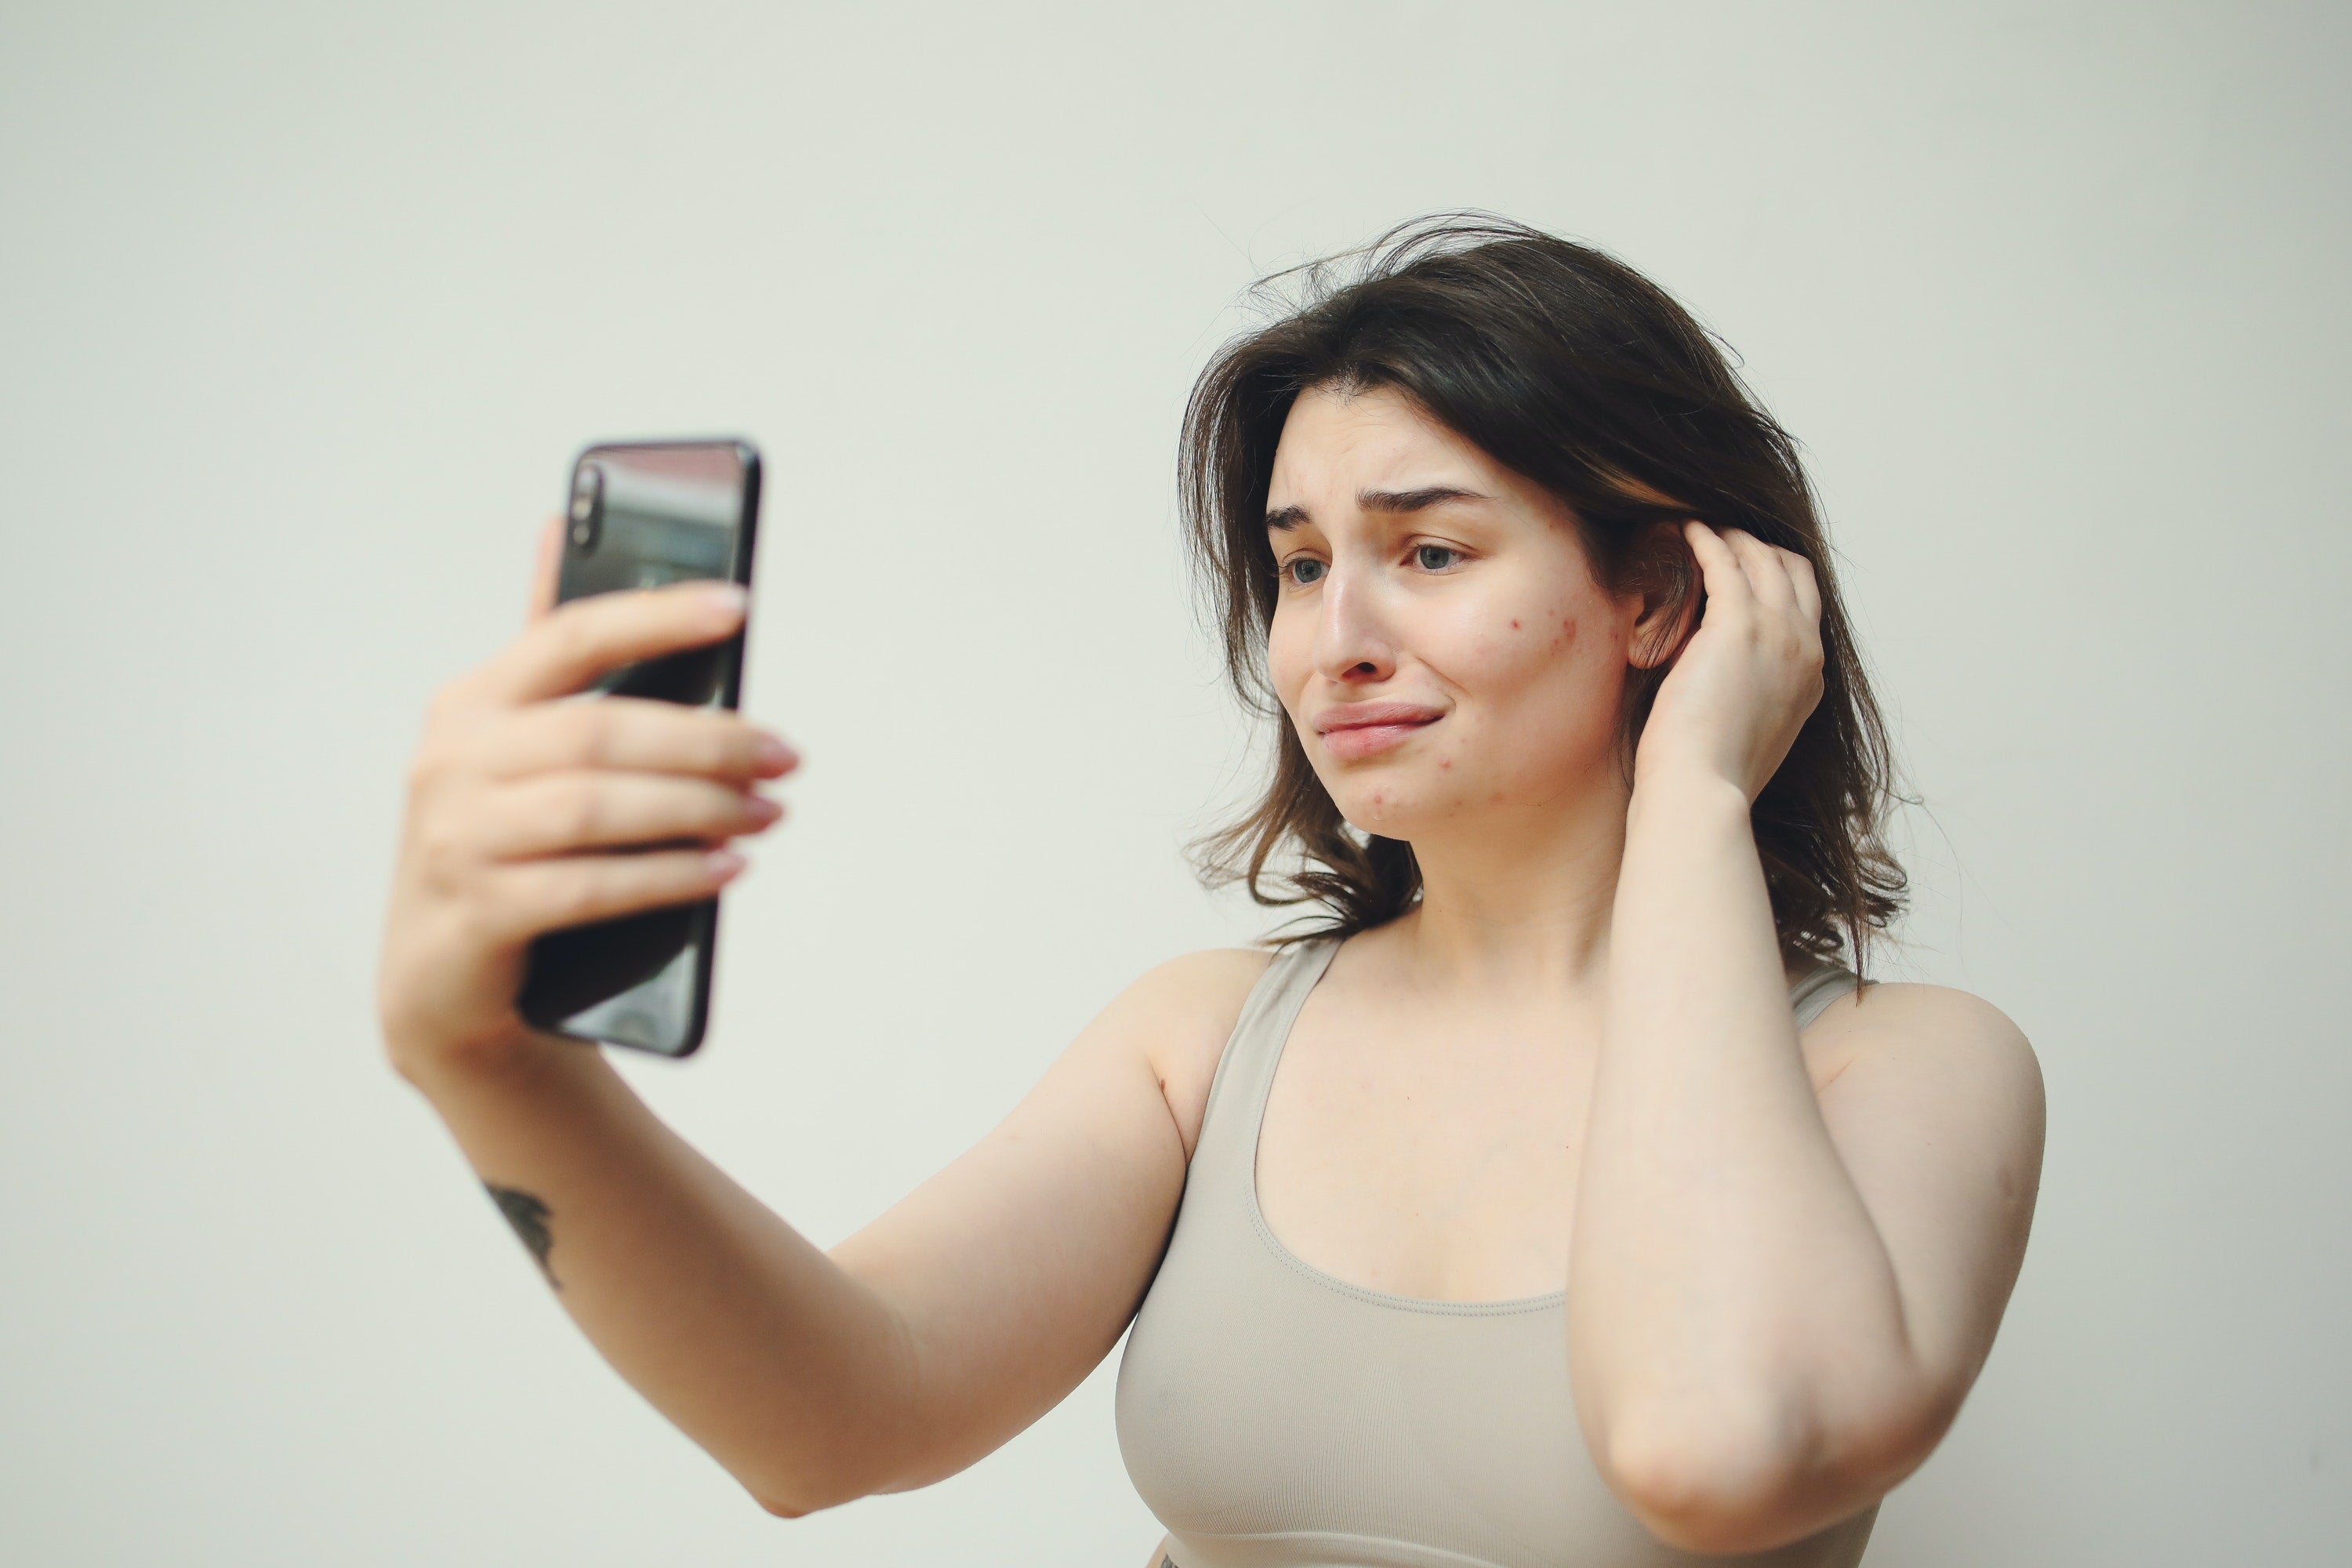 A woman holding a phone up. She looks unhappy with her appearance.